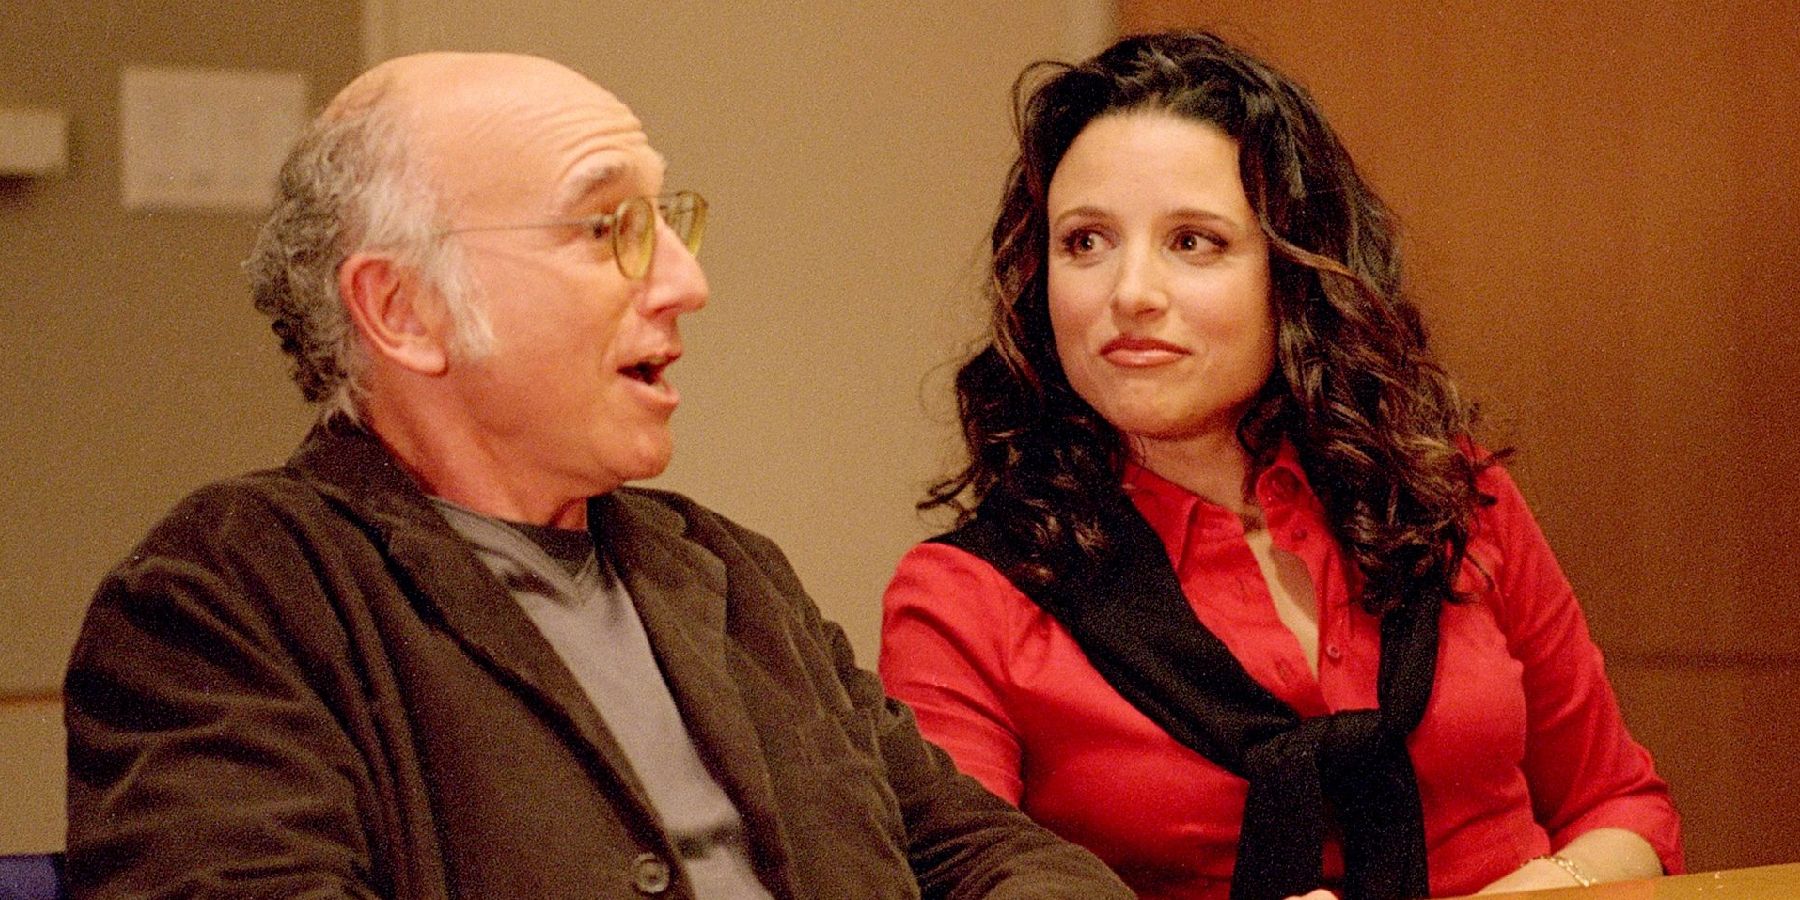 Larry David and Julia Louis-Dreyfus pitch a sitcom in Curb Your Enthusiasm